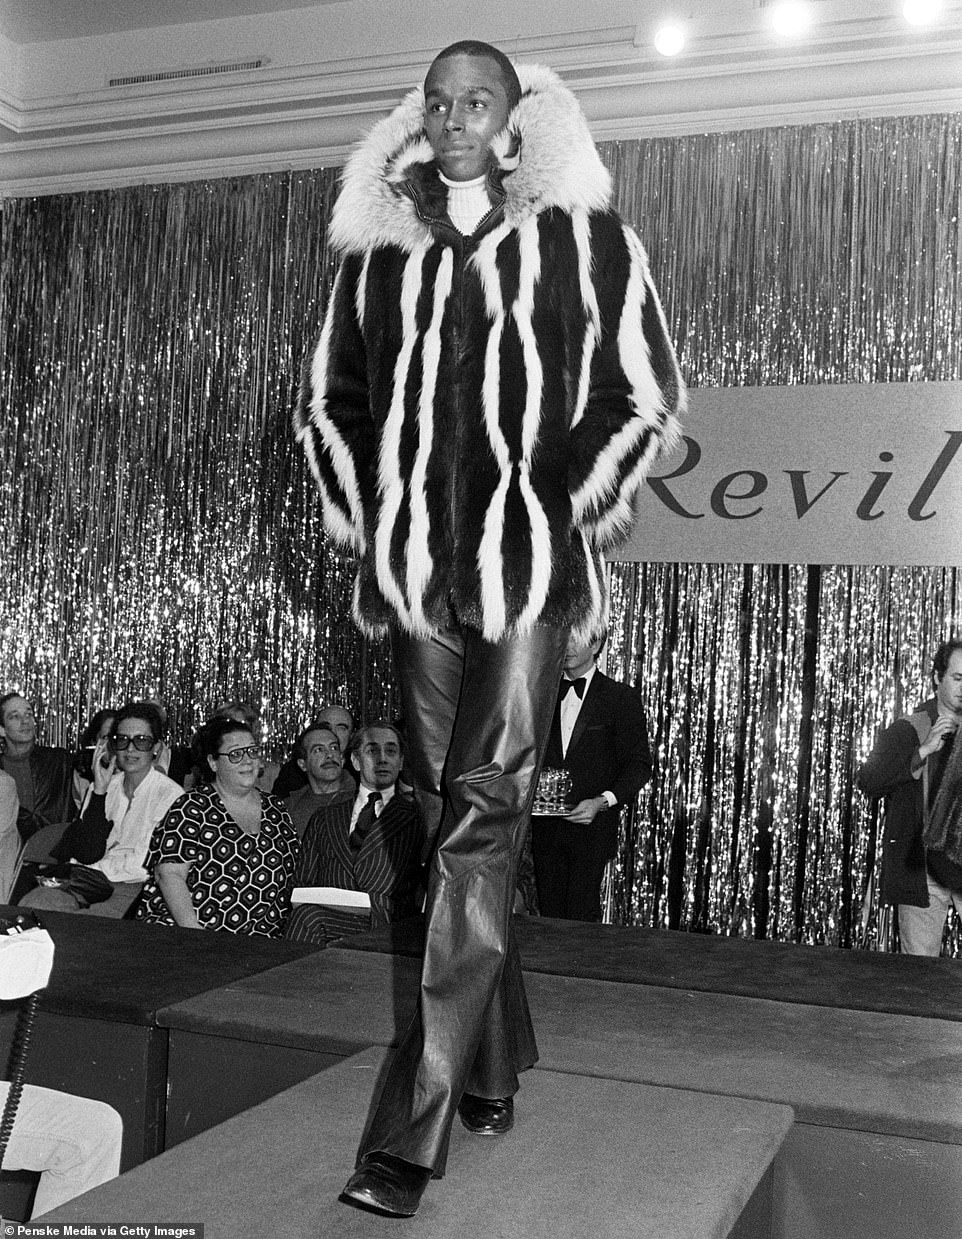 Well-aware of his dazzling looks and charisma, Sterling - seen here on a Revillon Furs runway in 1976 - relished the attention, and attracted men and women alike